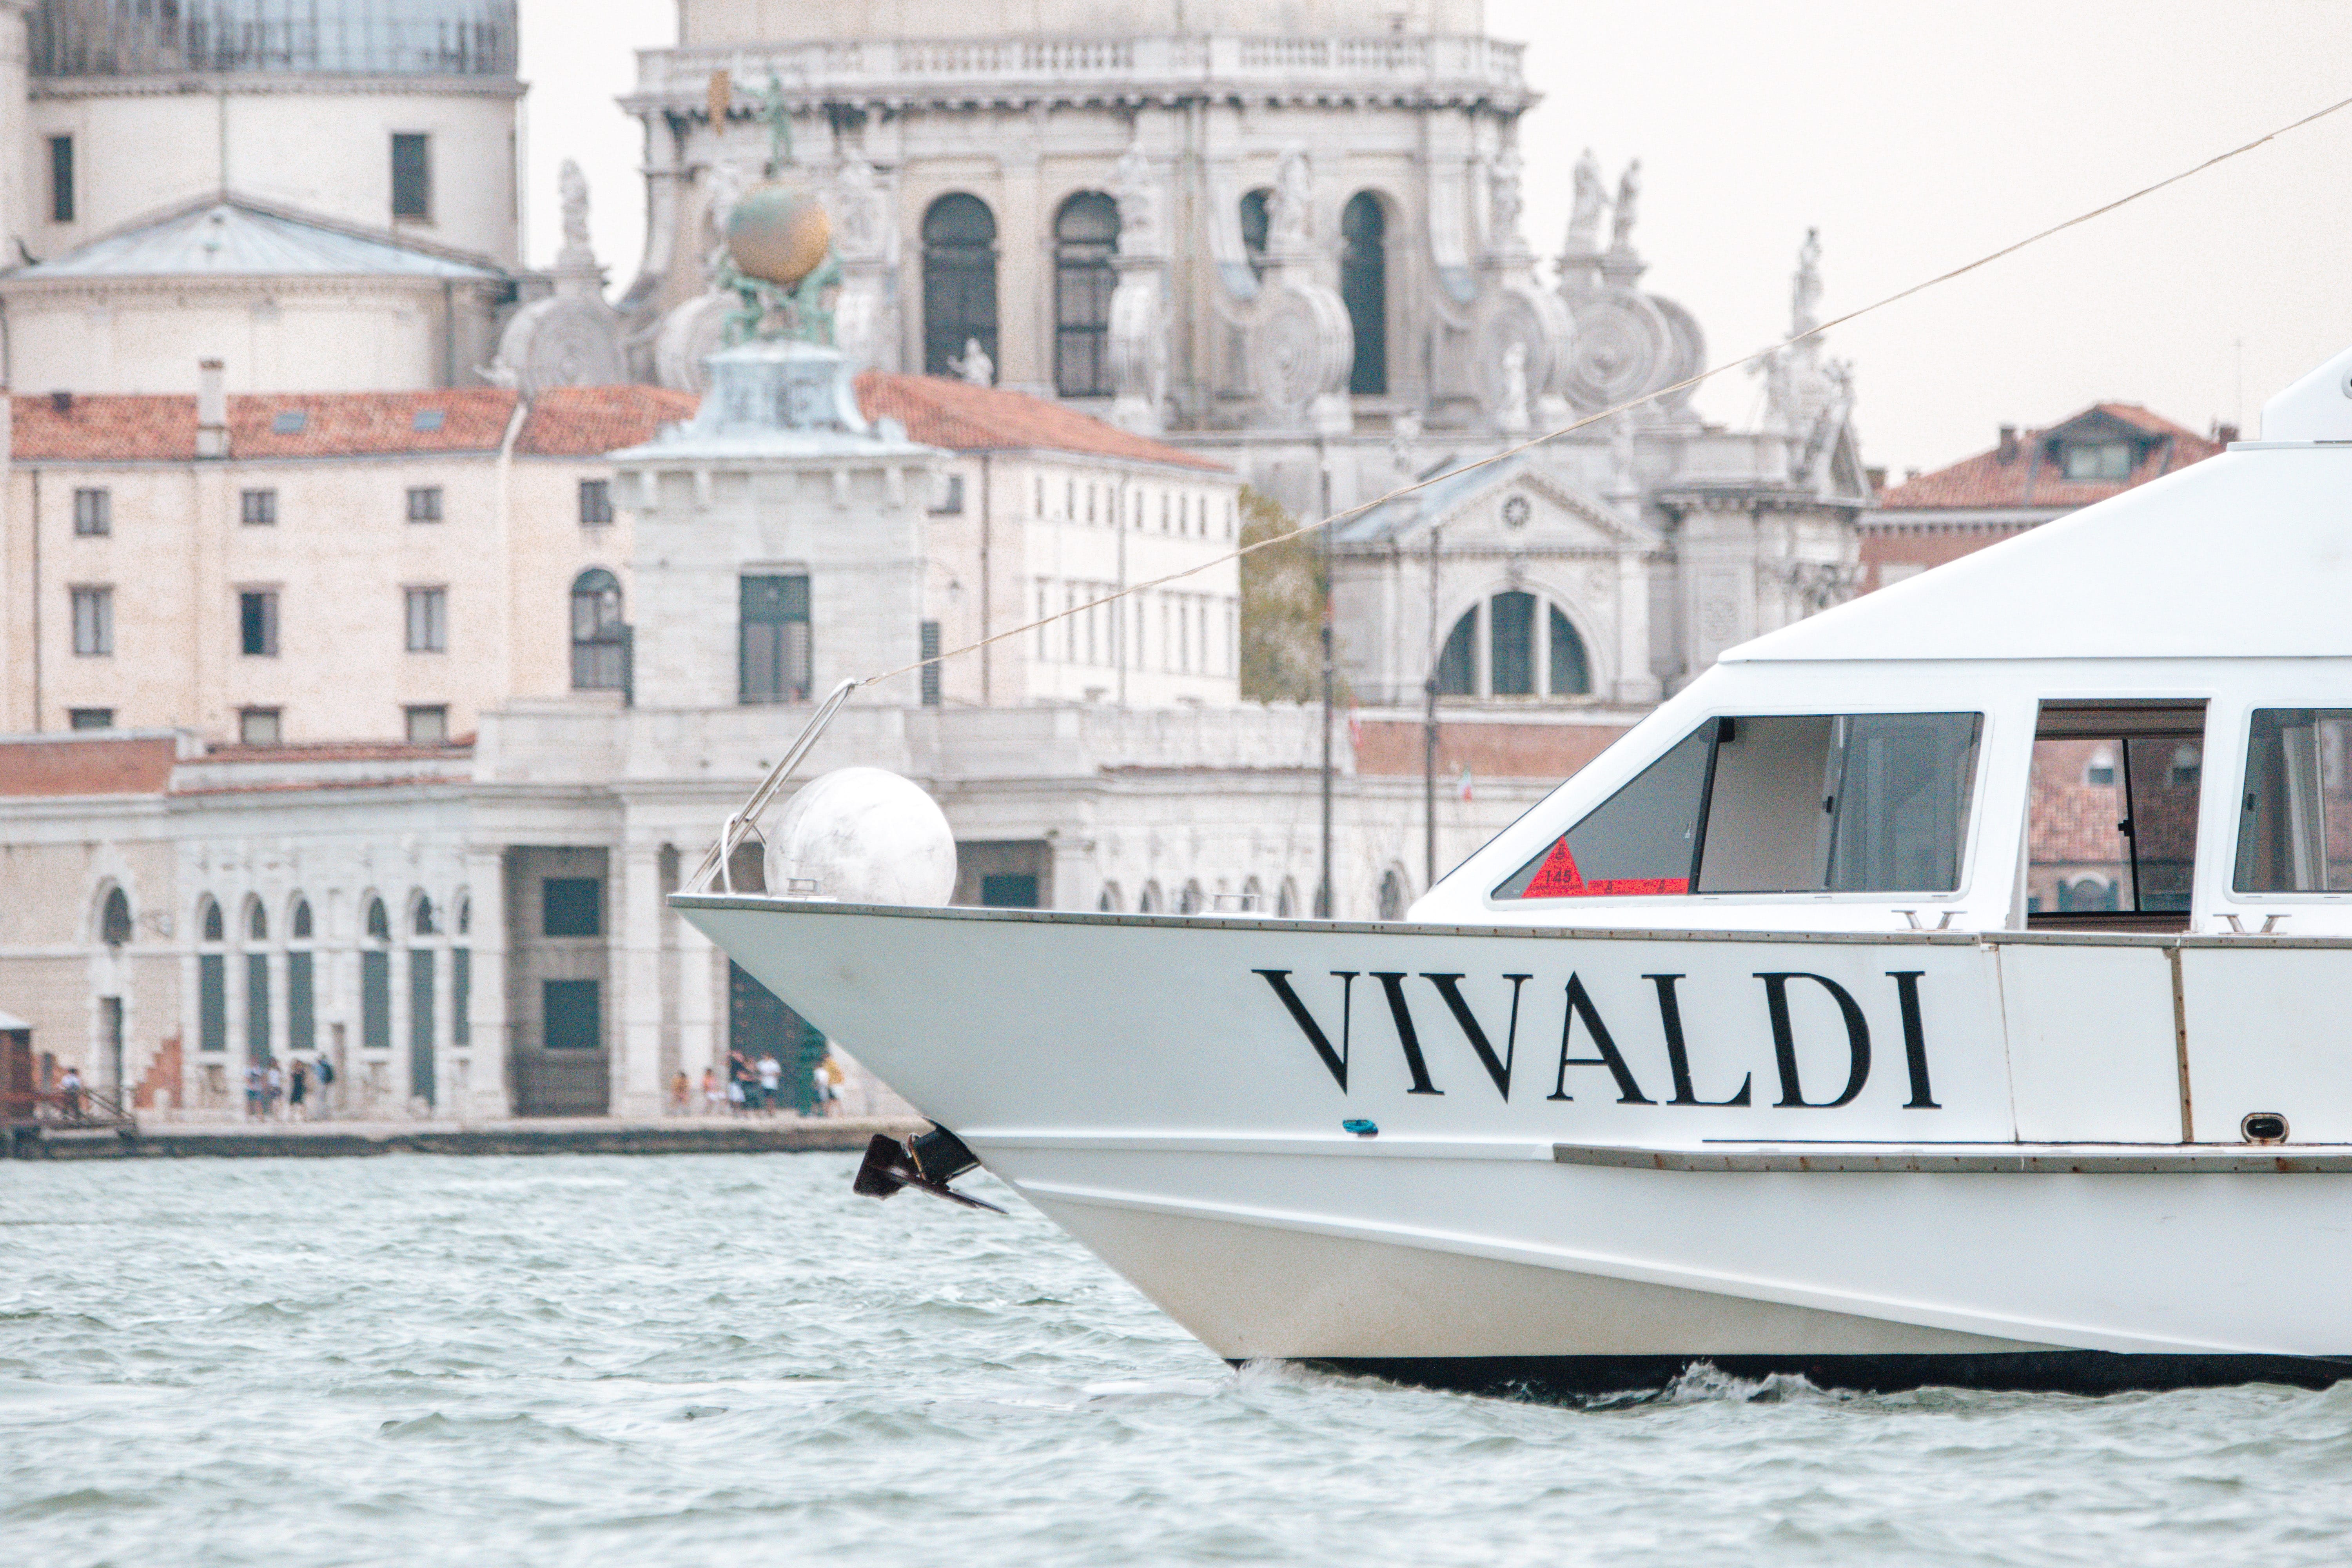 Venice Airport Transfer - Airport Water Taxi - A private water taxi approaches in the water near Venice, Italy. Wooden boats serve as private transportation throughout Venice, but are much more expensive than public transportation options